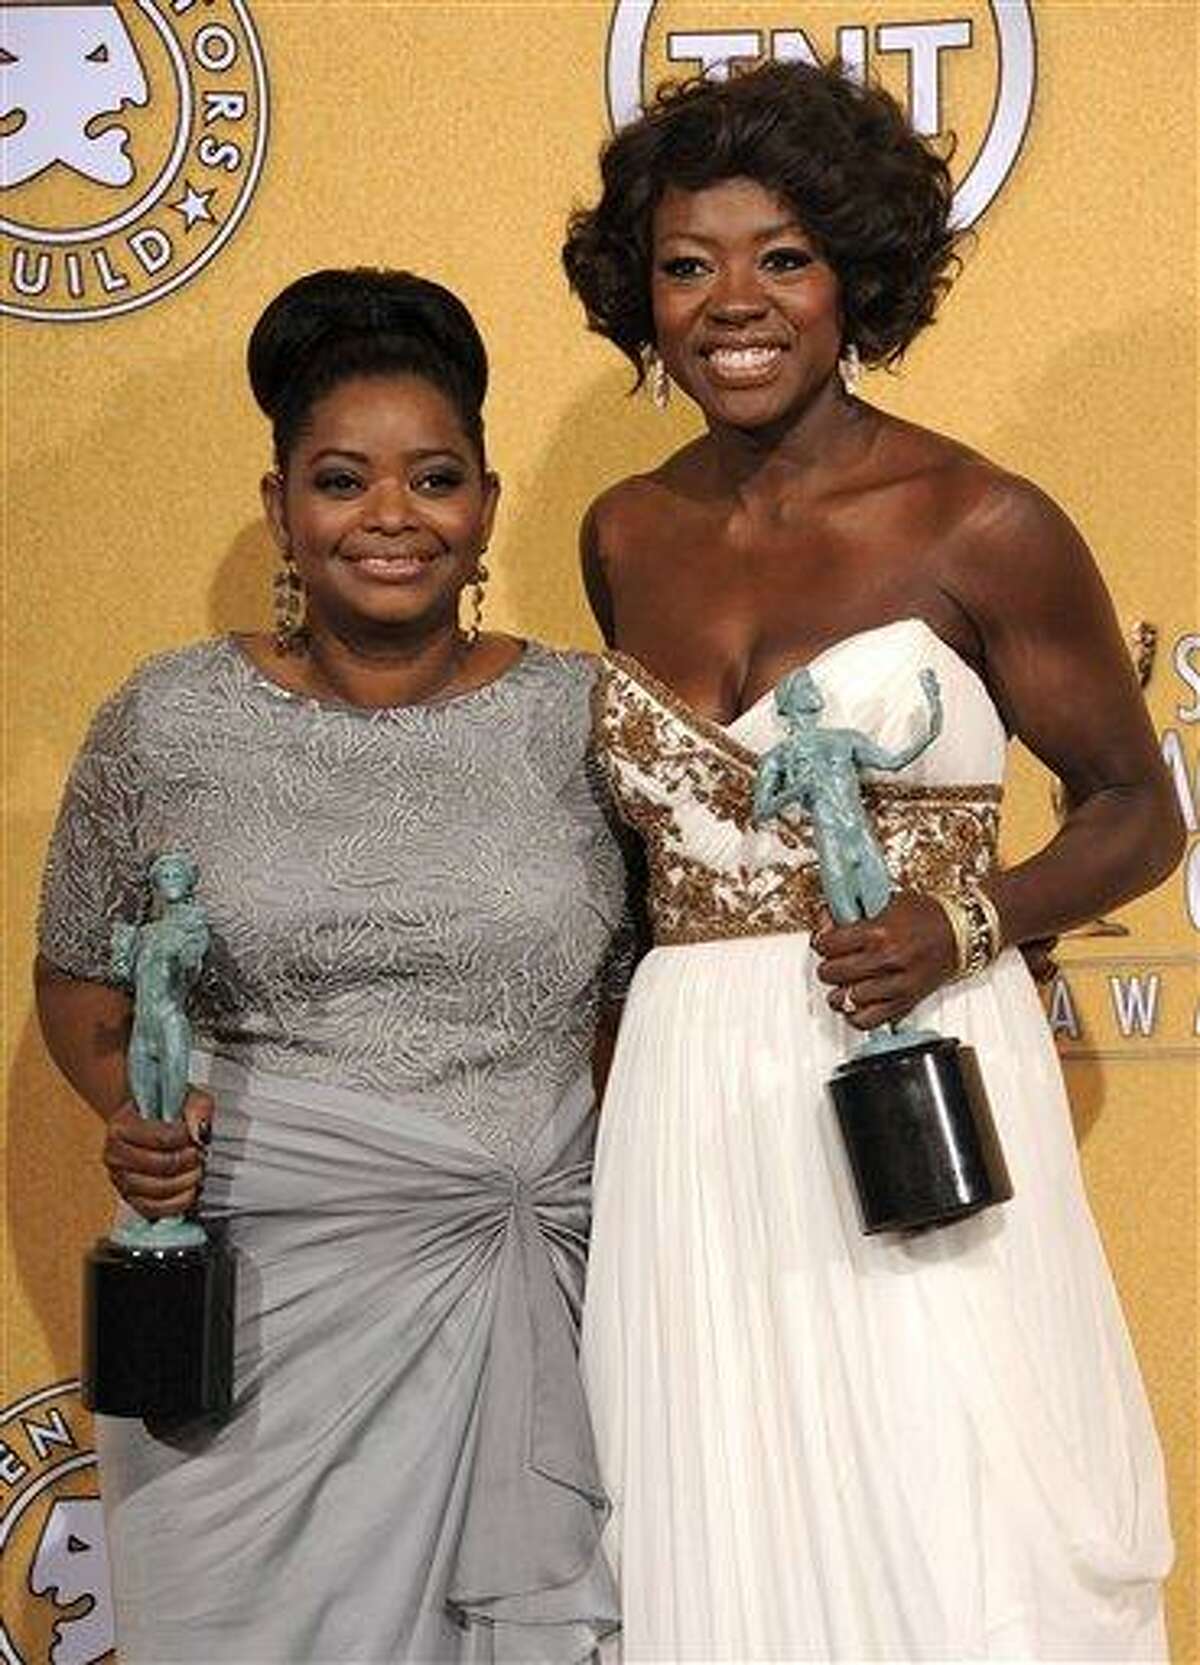 Octavia Spencer, winner of award for outstanding performance by a female actor in a supporting role for "The Help," left, and Viola Davis, winner of the award for outstanding performance by a female actor in a leading role for "The Help," pose backstage at the 18th Annual Screen Actors Guild Awards on Sunday Jan. 29, 2012 in Los Angeles.